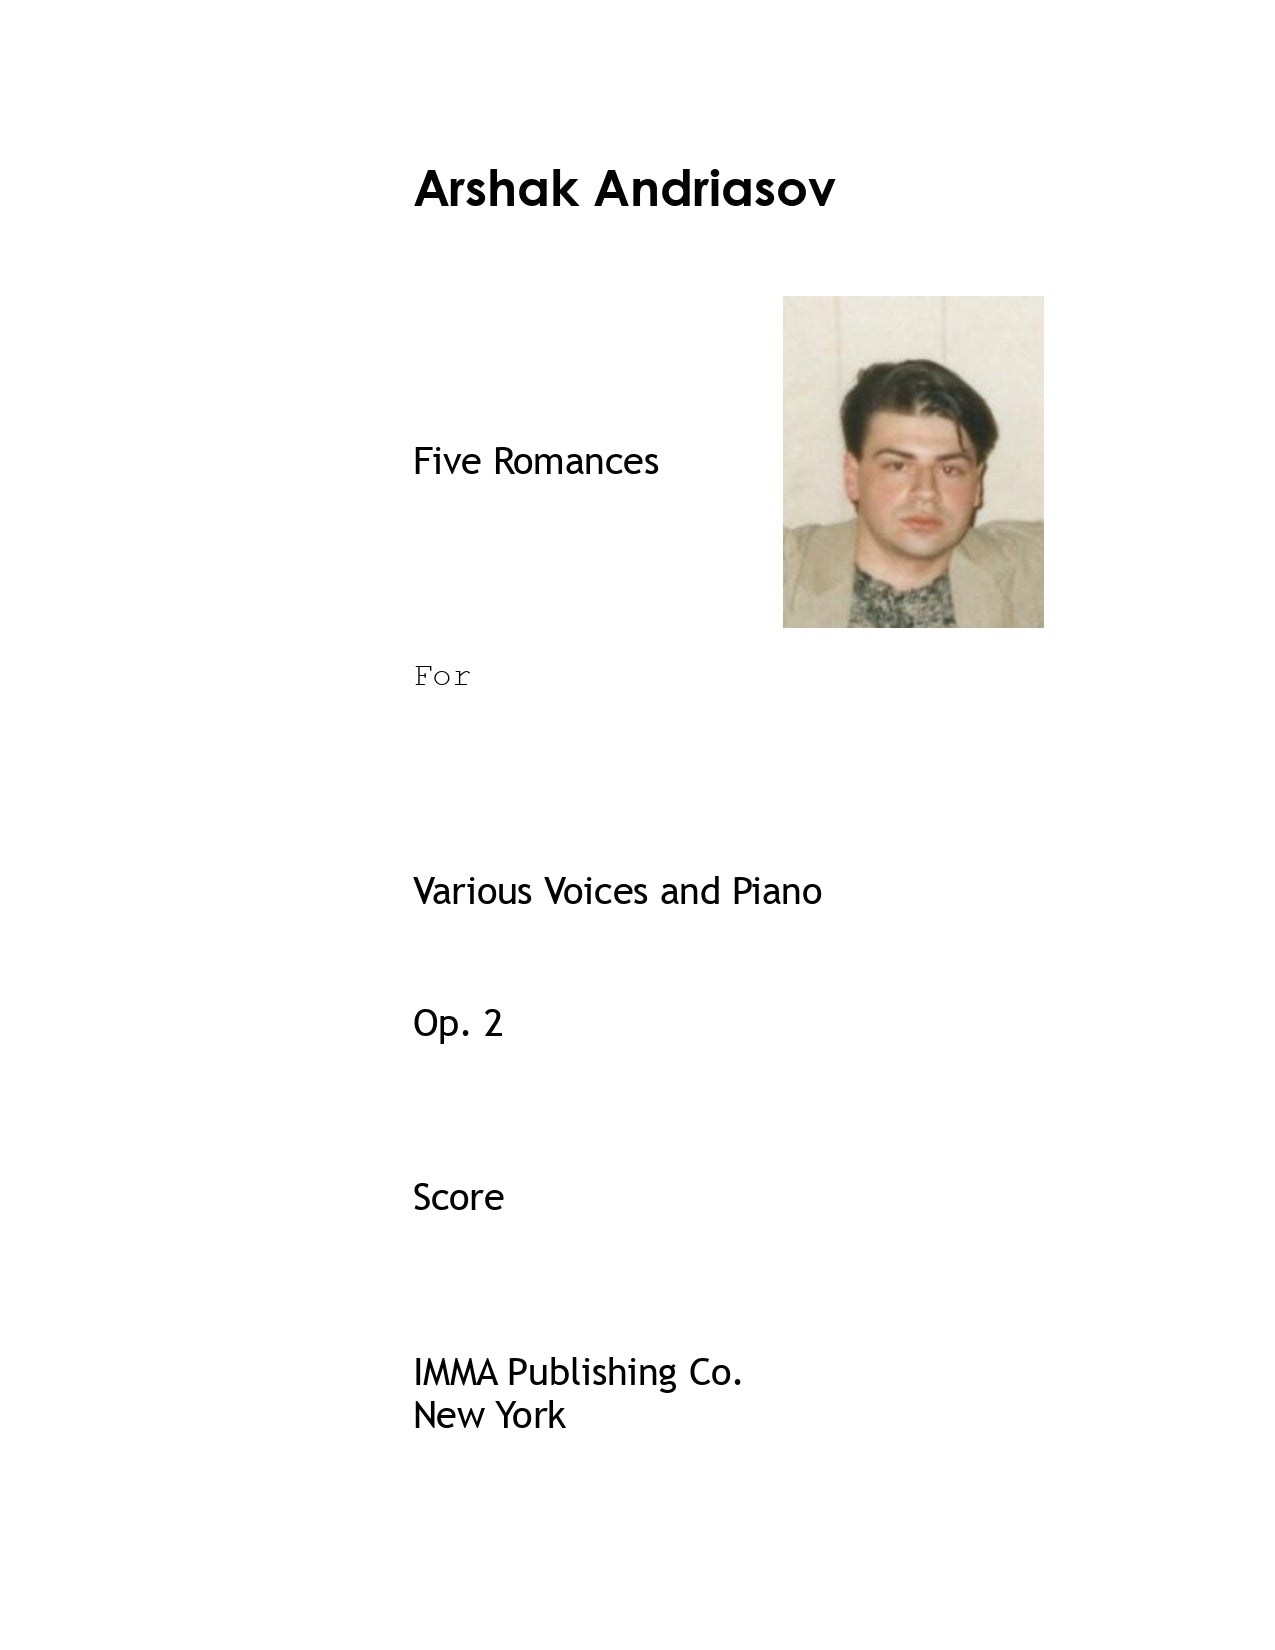 089. Arshak Andriasov: Five Romances, Op. 2 for Various Voices and Piano (PDF)